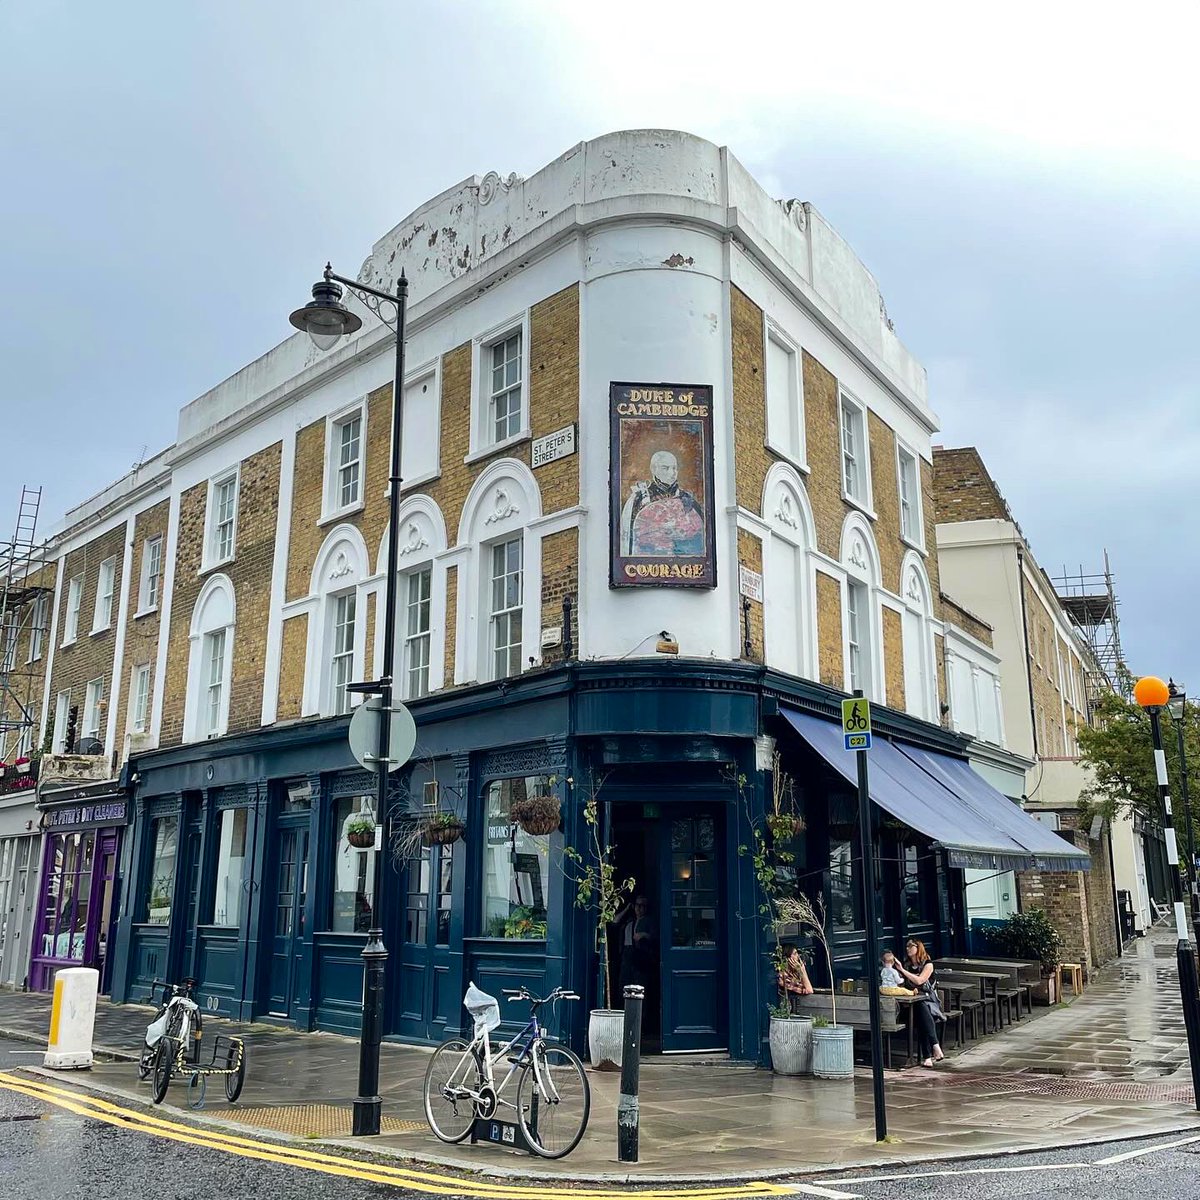 The Duke of Cambridge 
📍30 St Peter's St, London N1 8JT
🚇Angel
🍺 £6.30 Crate Lager
❤️ Britain’s first organic pub.

Full review on Instagram, link in bio.

#islington #londonpubs #n1 #dukeofcambridge  #angel #cratebrewery 

More pictures in comments below. 👇